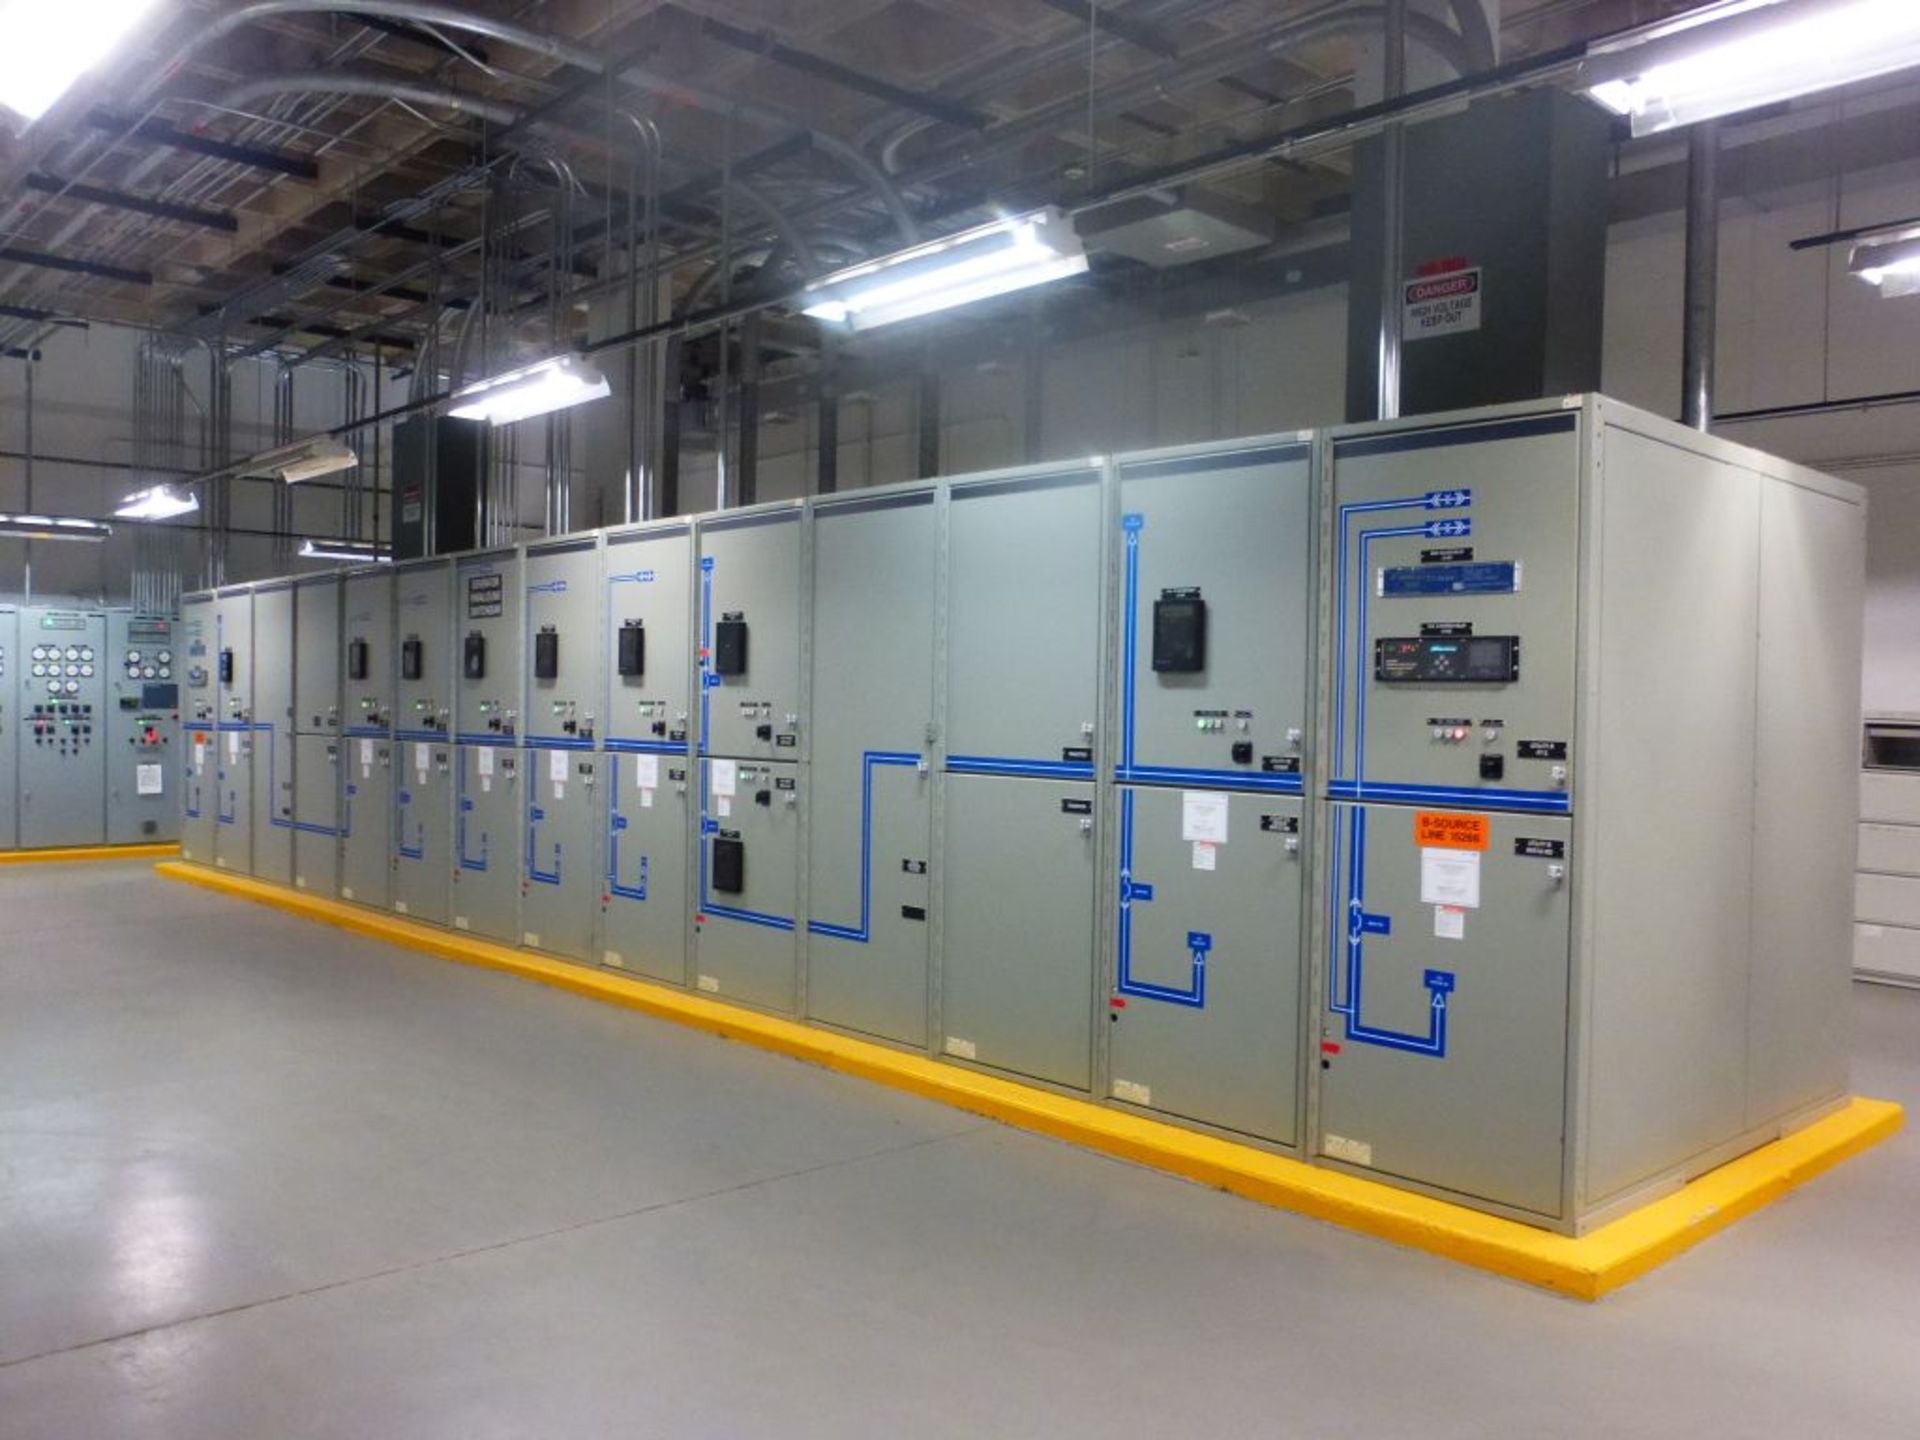 GE Powervac Switchgear | (14) Verticals; 4160V; 1200A; Includes: (12) GE Powervac 1200A Breakers,